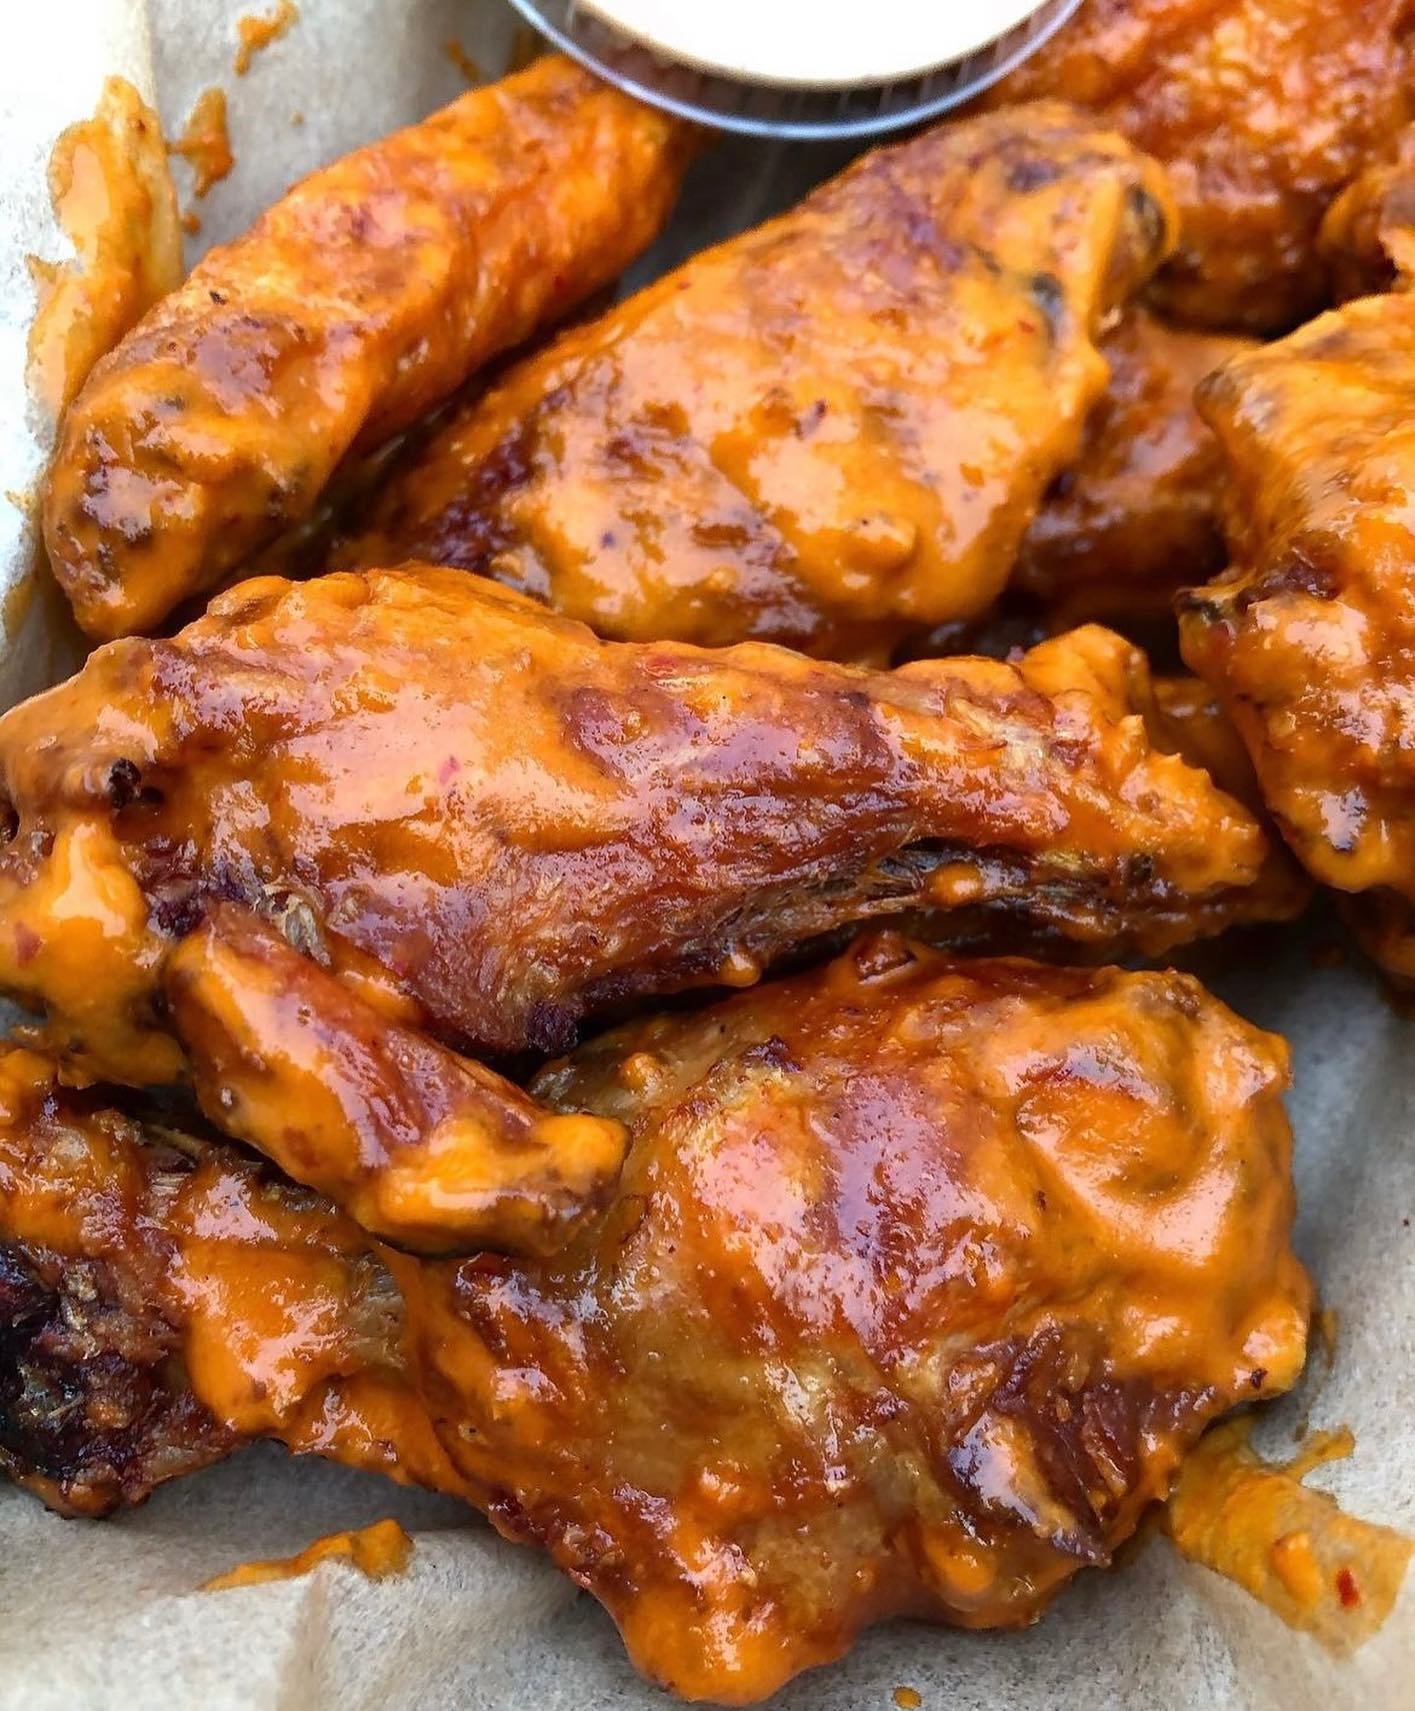 Wednesday: It&rsquo;s giving 🍗✨50% off all wings 🍗✨

Need a quick pick-up? Dial (504) 510-4040!